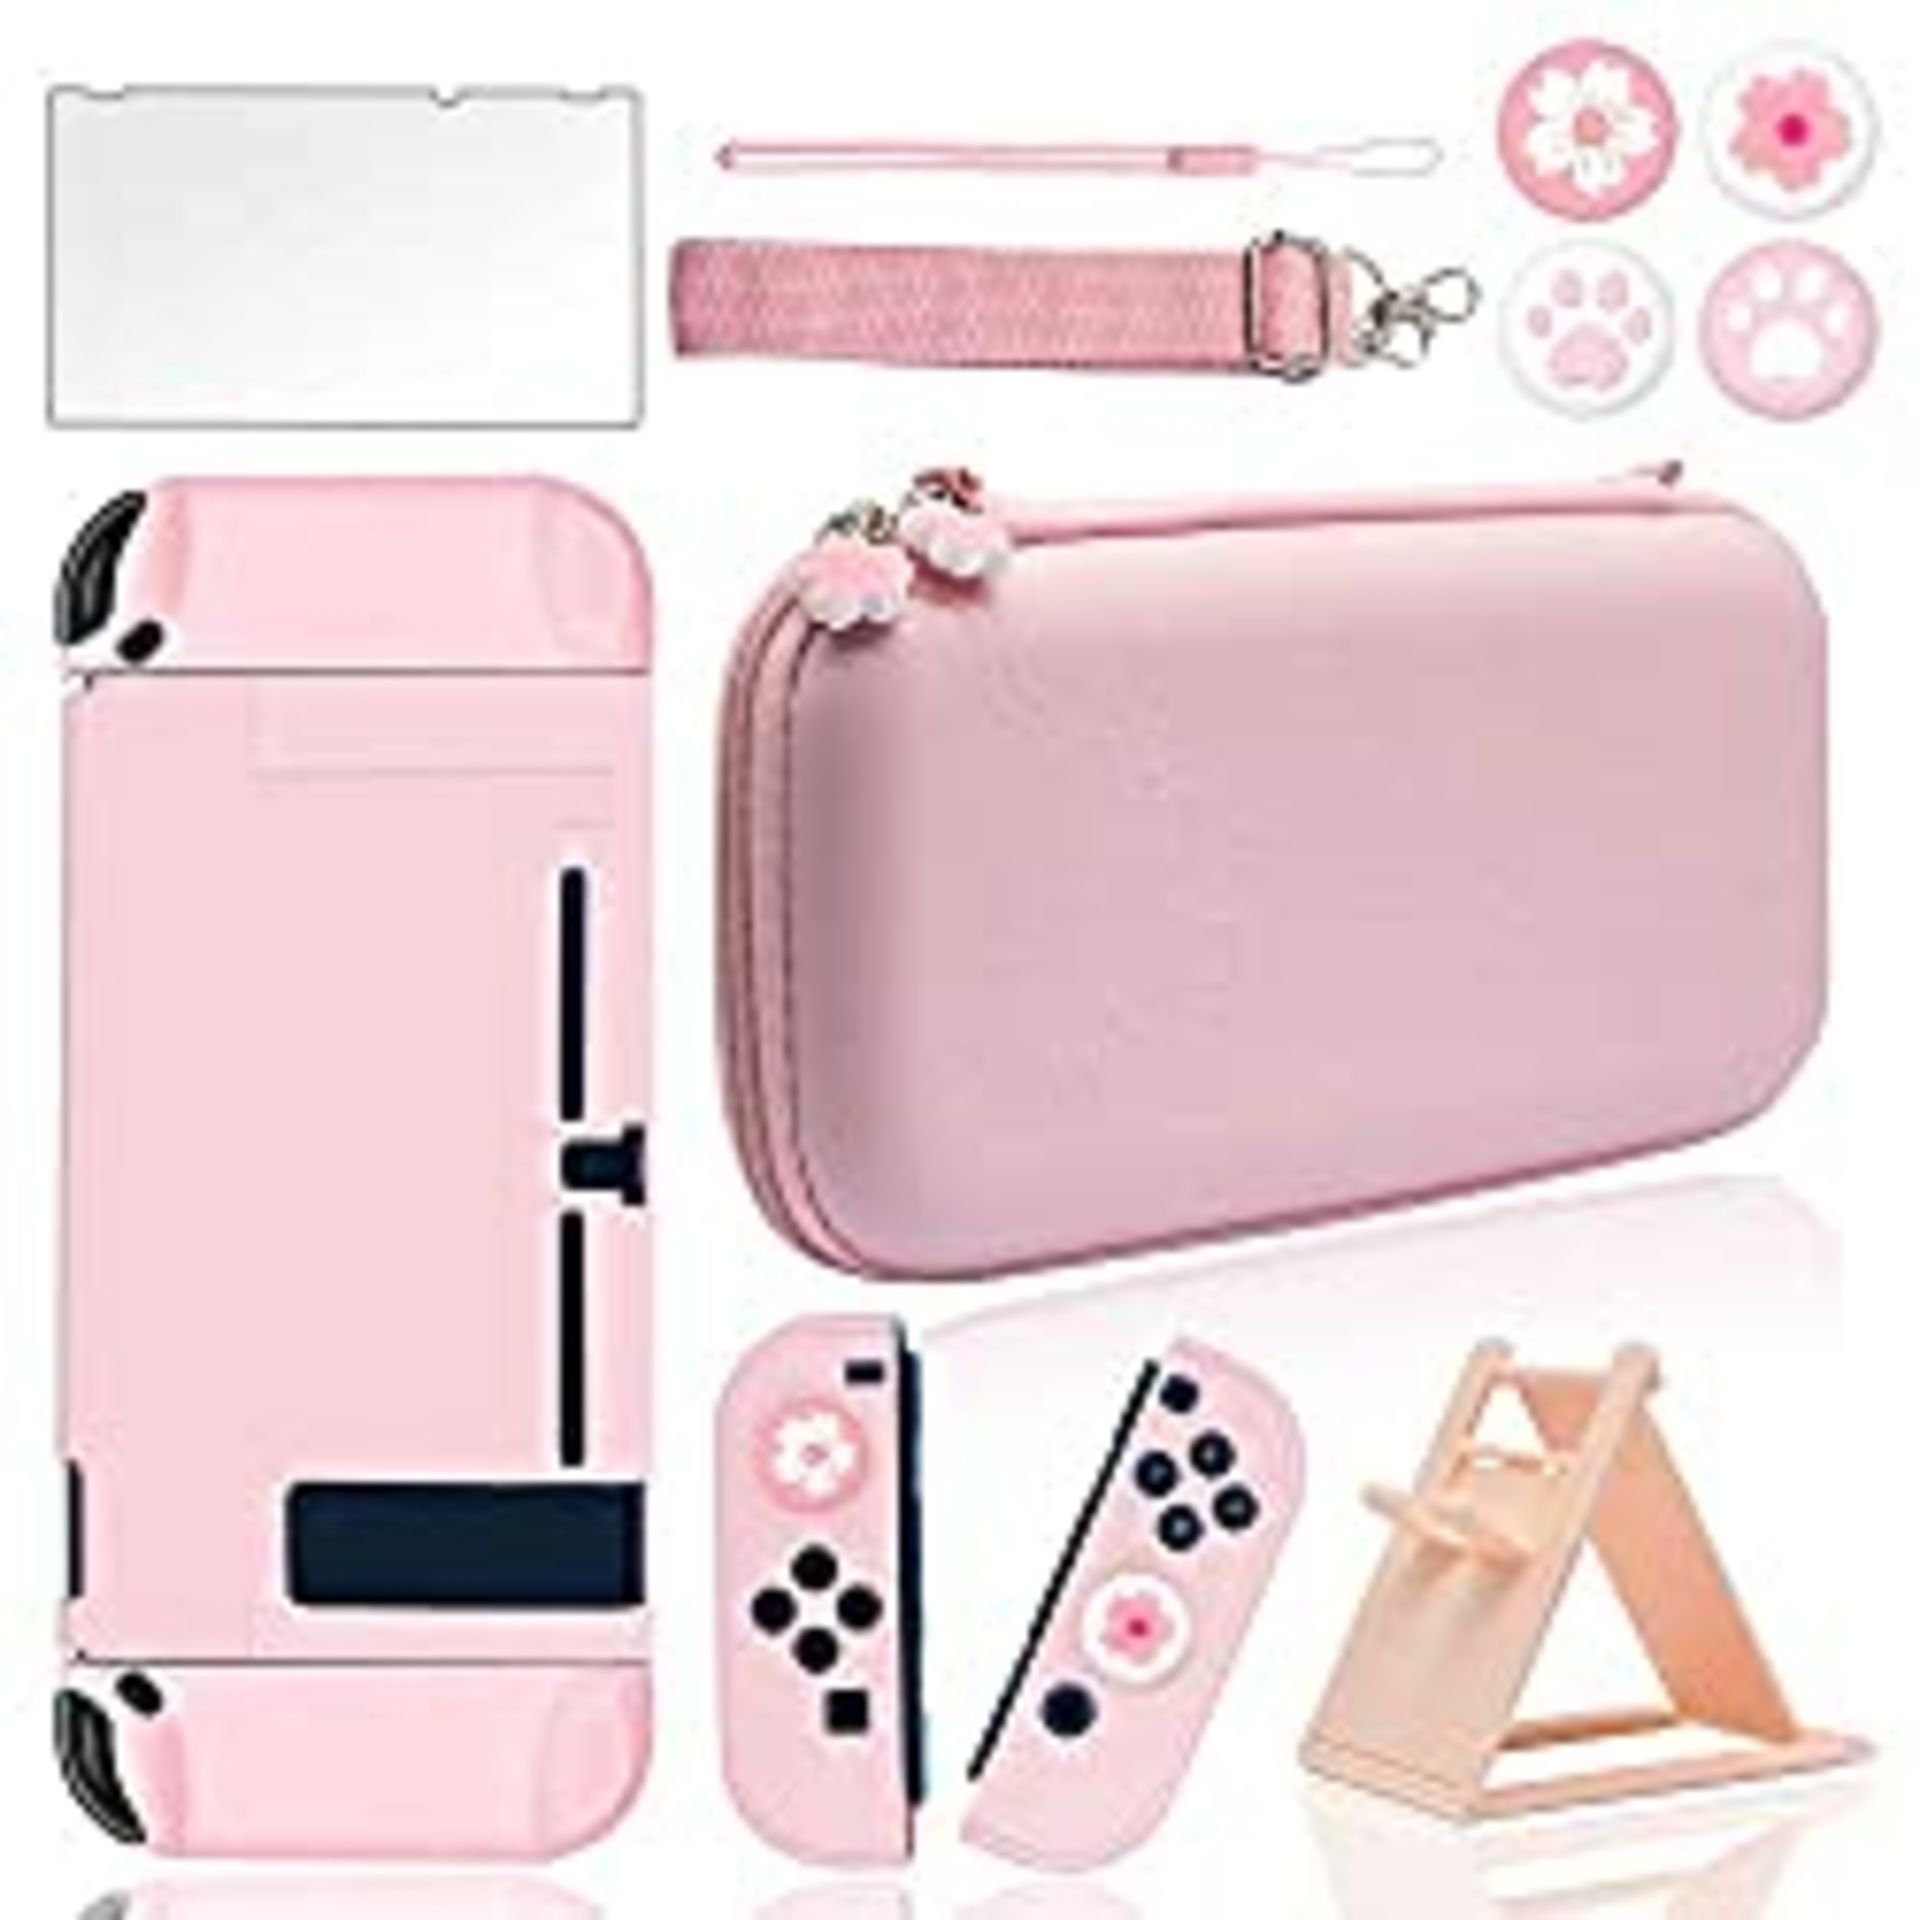 RRP £25.93 BRAND NEW STOCK BRHE Pink Carrying Case Accessories Kit for Nintendo